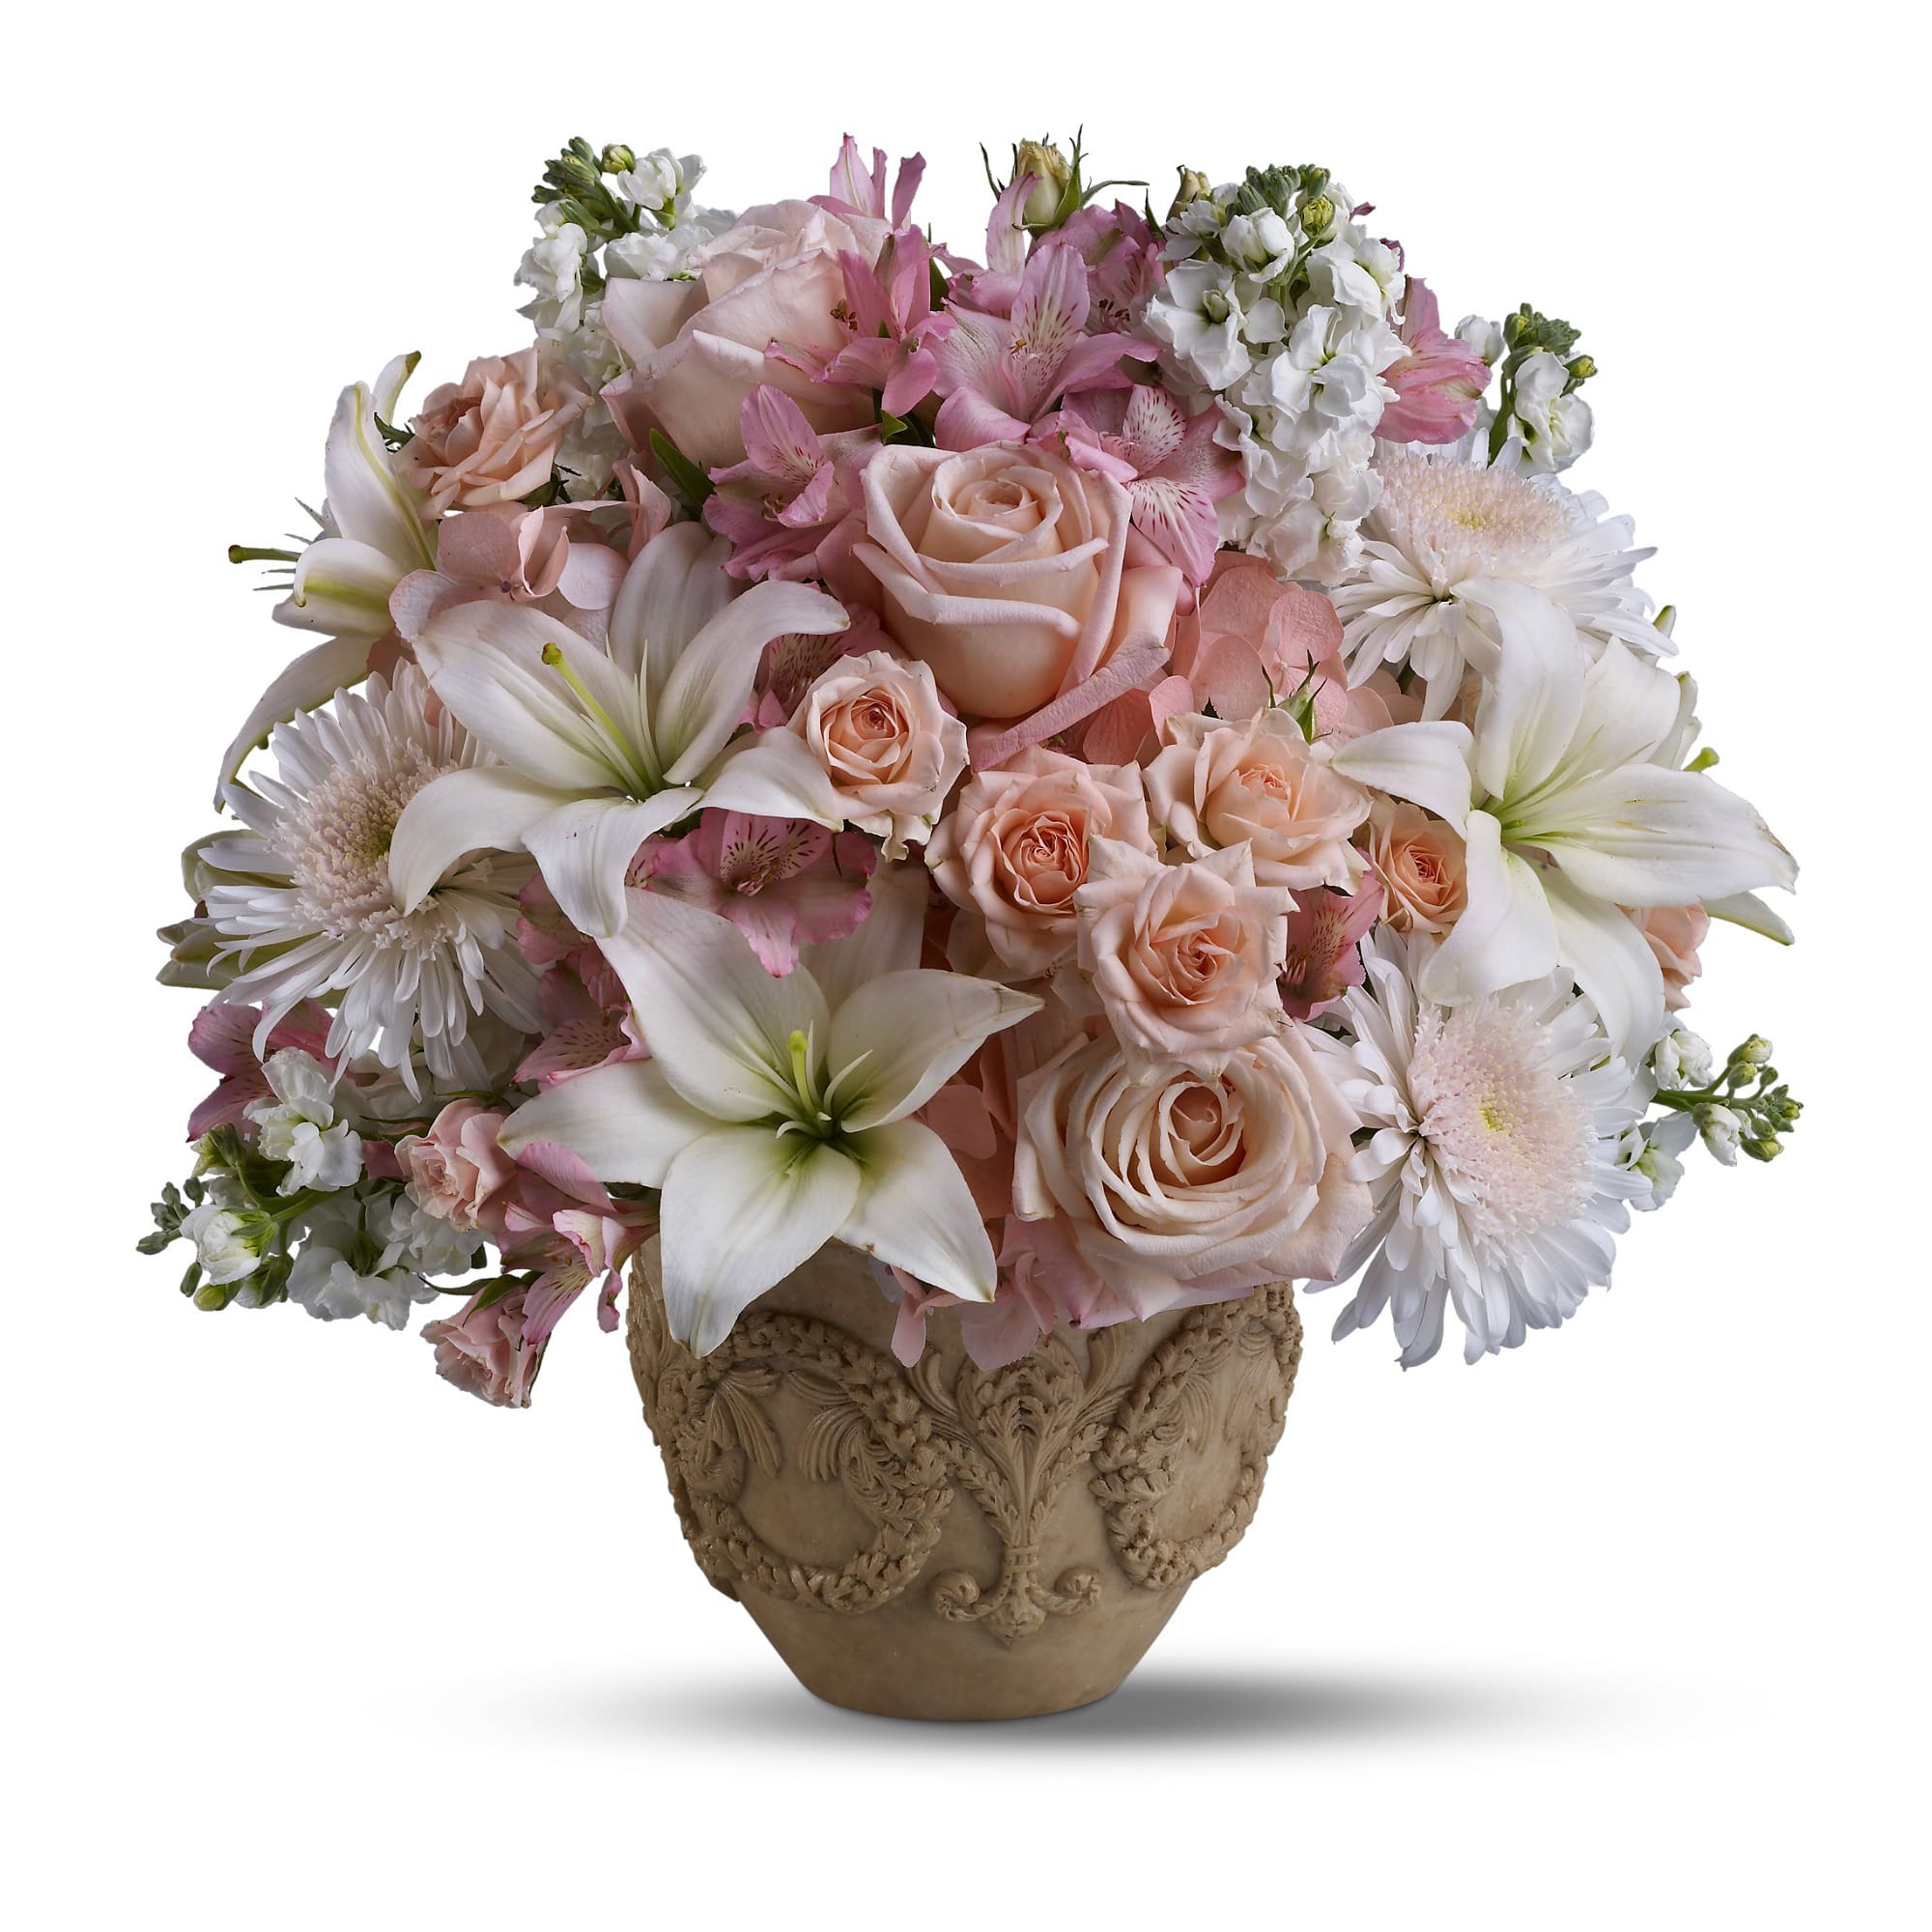 Garden of Memories - A garden of heavenly blooms offers an elegant and timeless tribute, beautifully honoring the spirit of the most precious departed. 